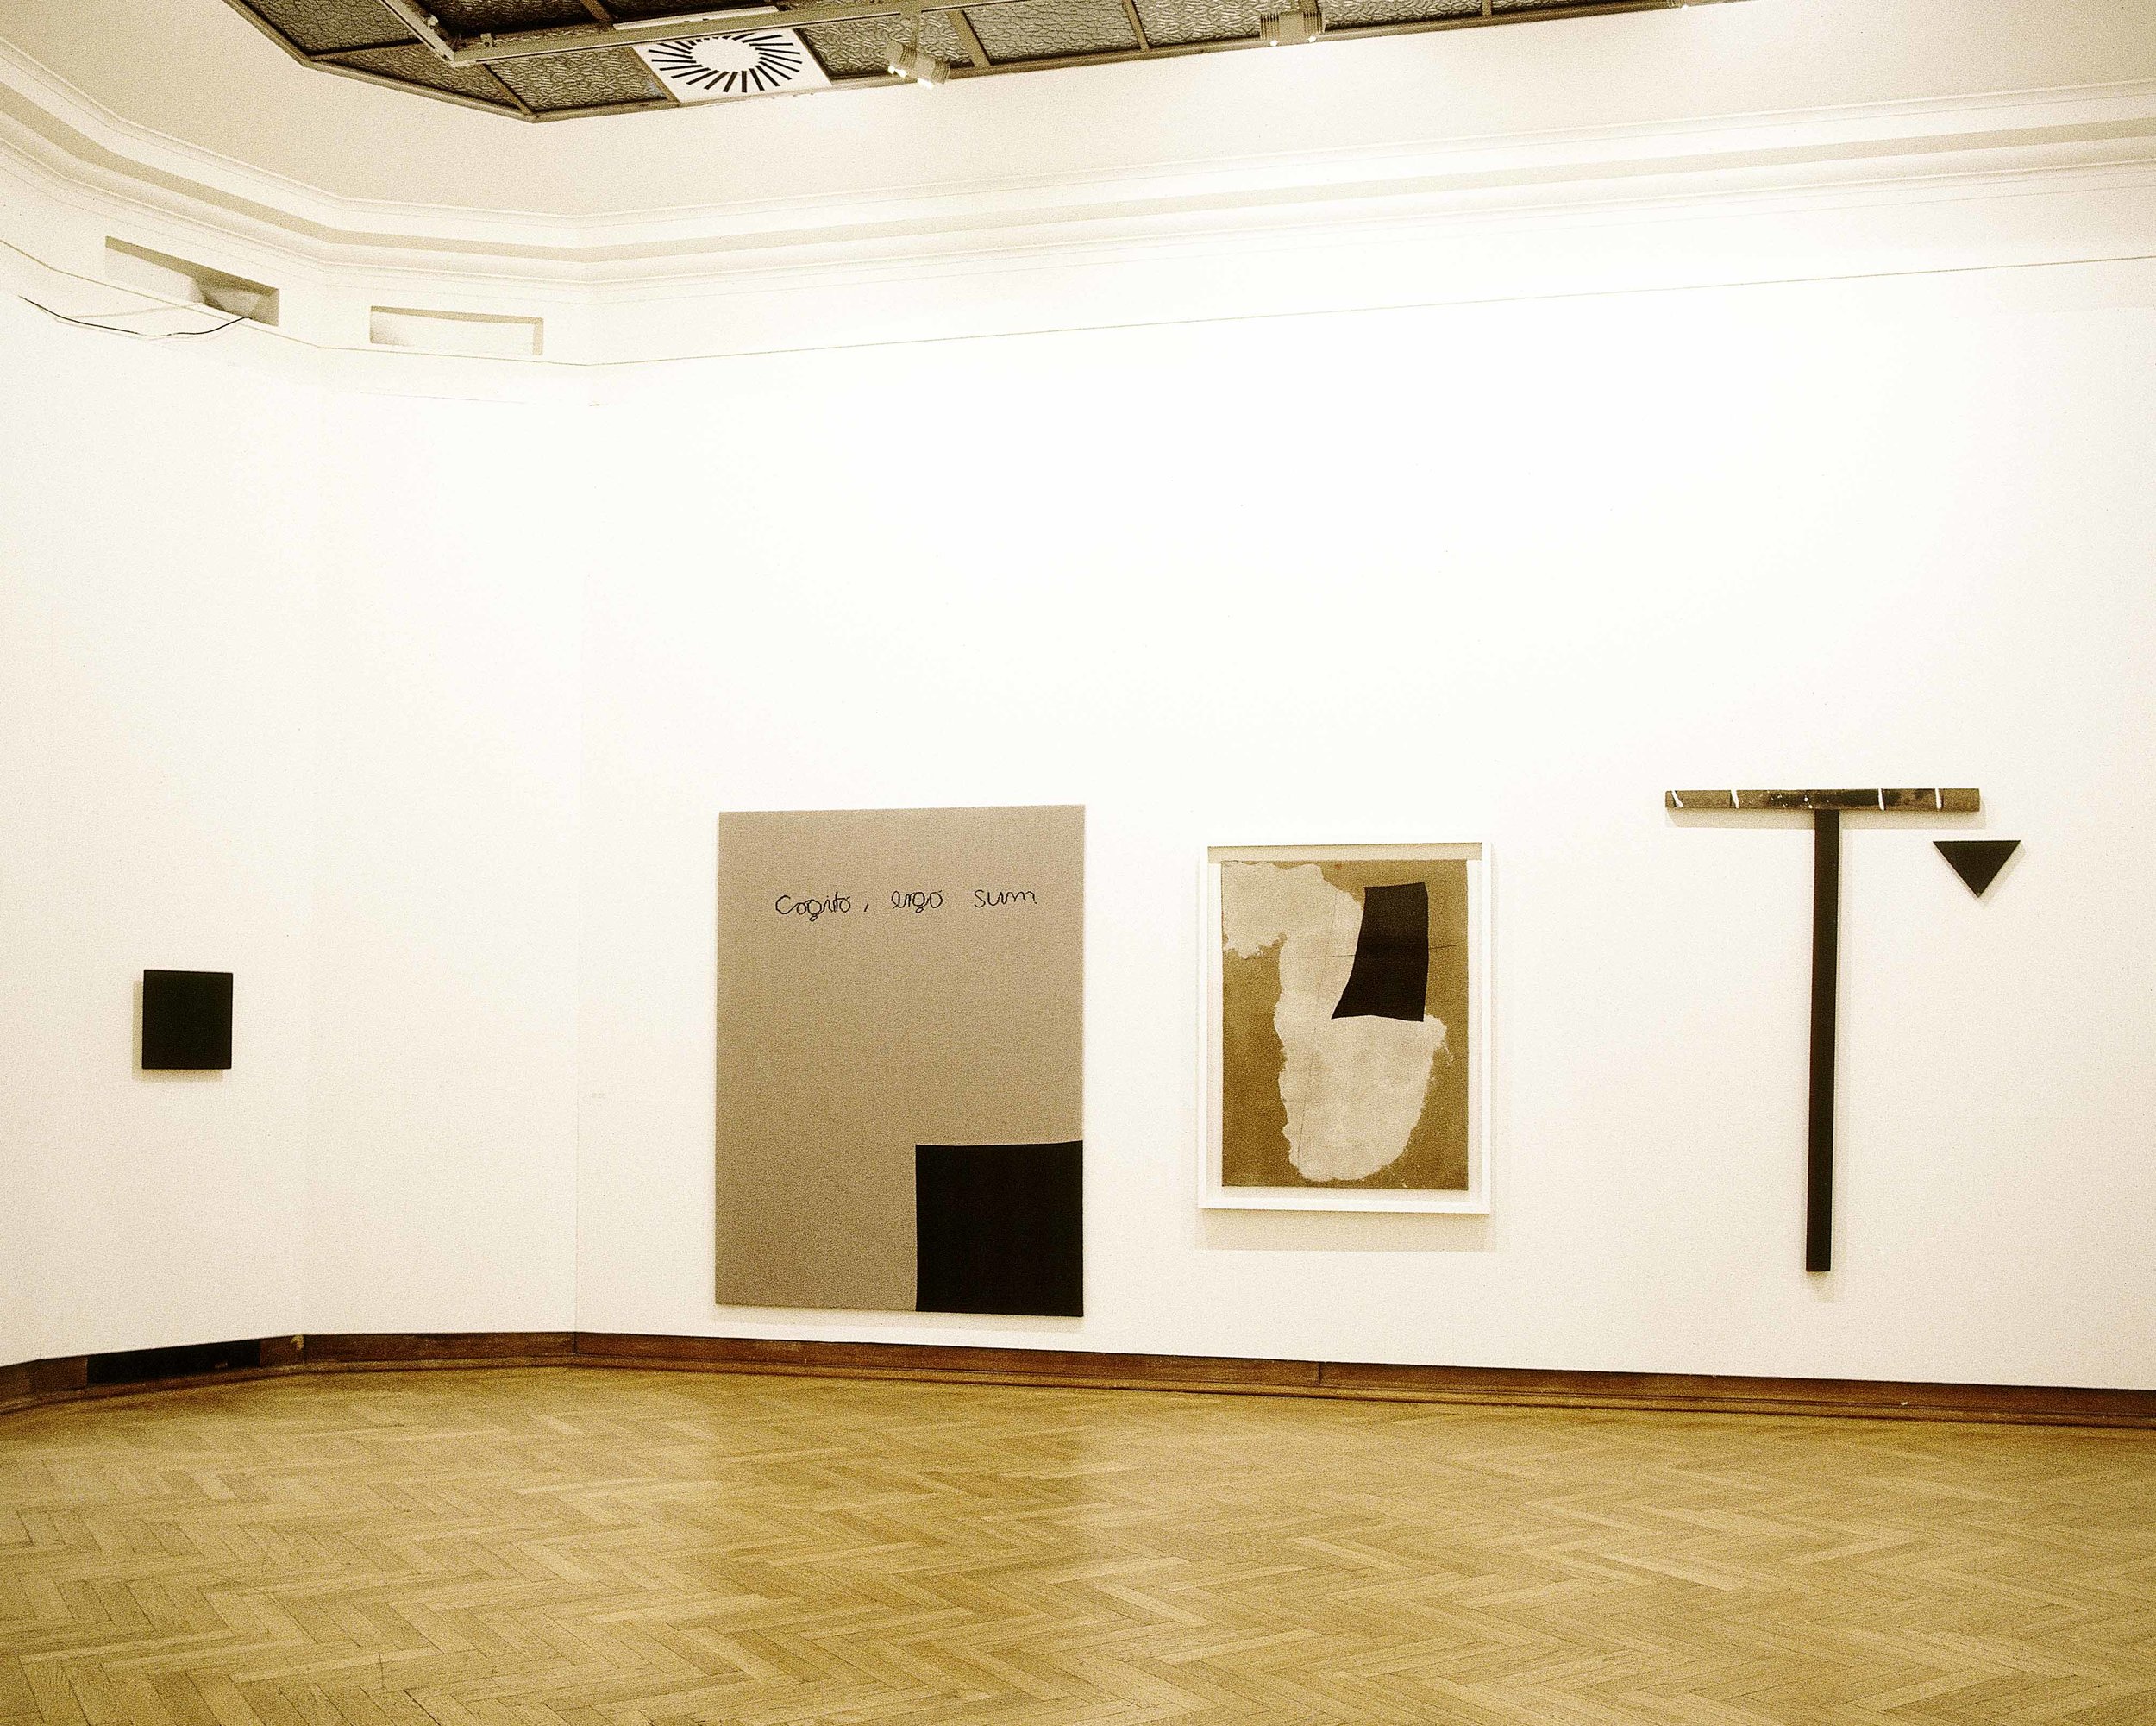   Vous voici, Reflections : Works by Umberg, Trockel, Miró, Palermo. Photo Philippe De Gobert. 